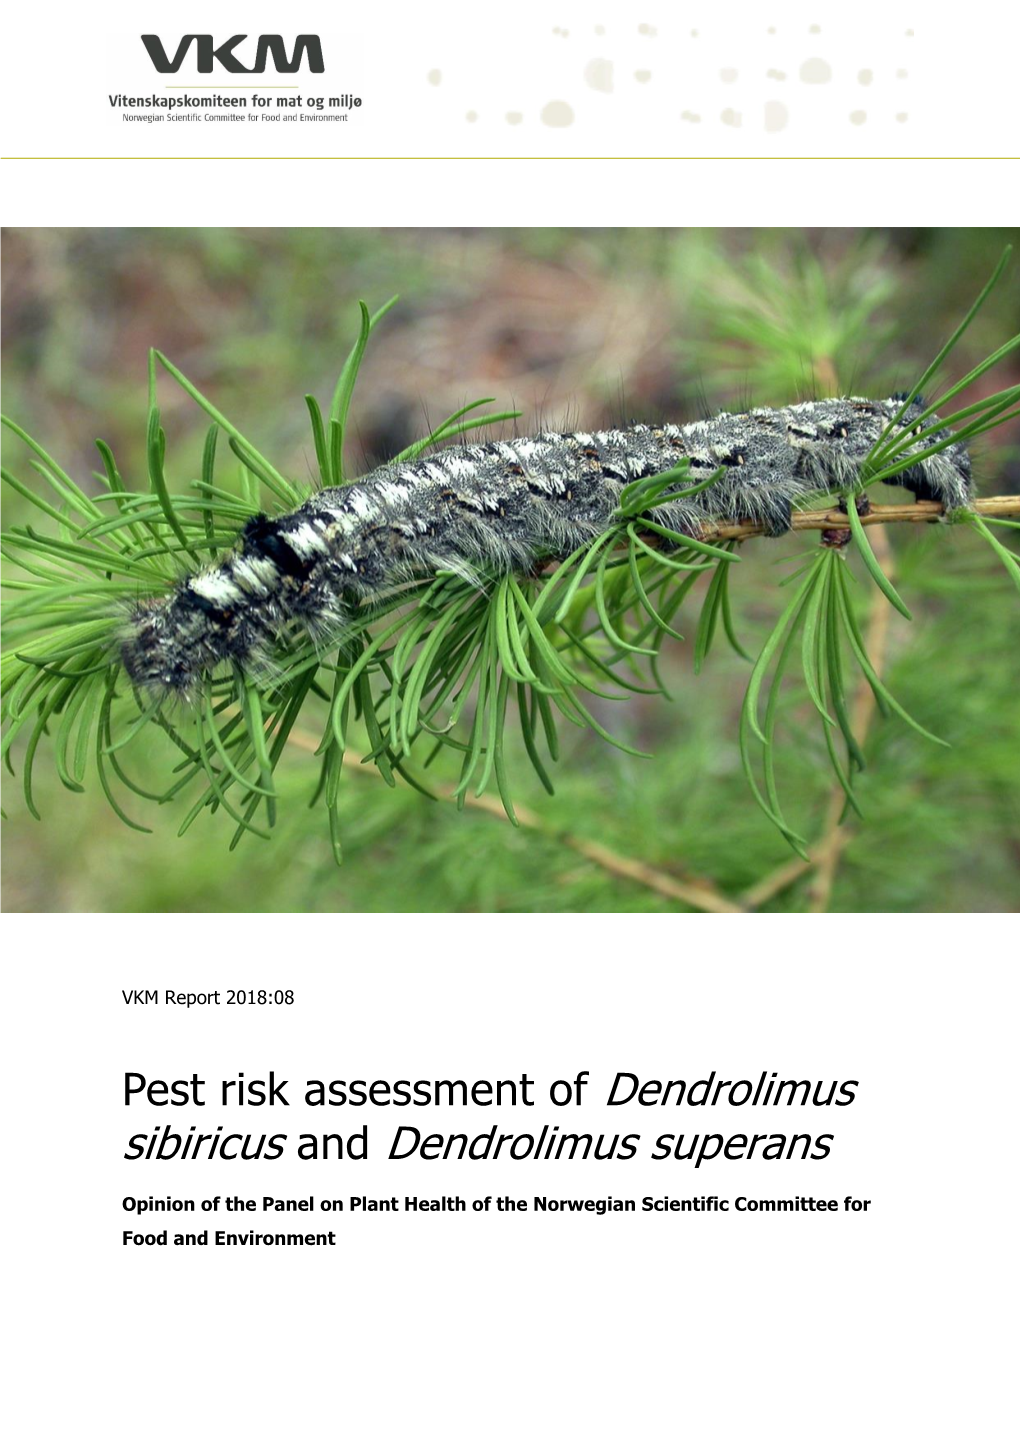 Pest Risk Assessment of Dendrolimus Sibiricus and Dendrolimus Superans